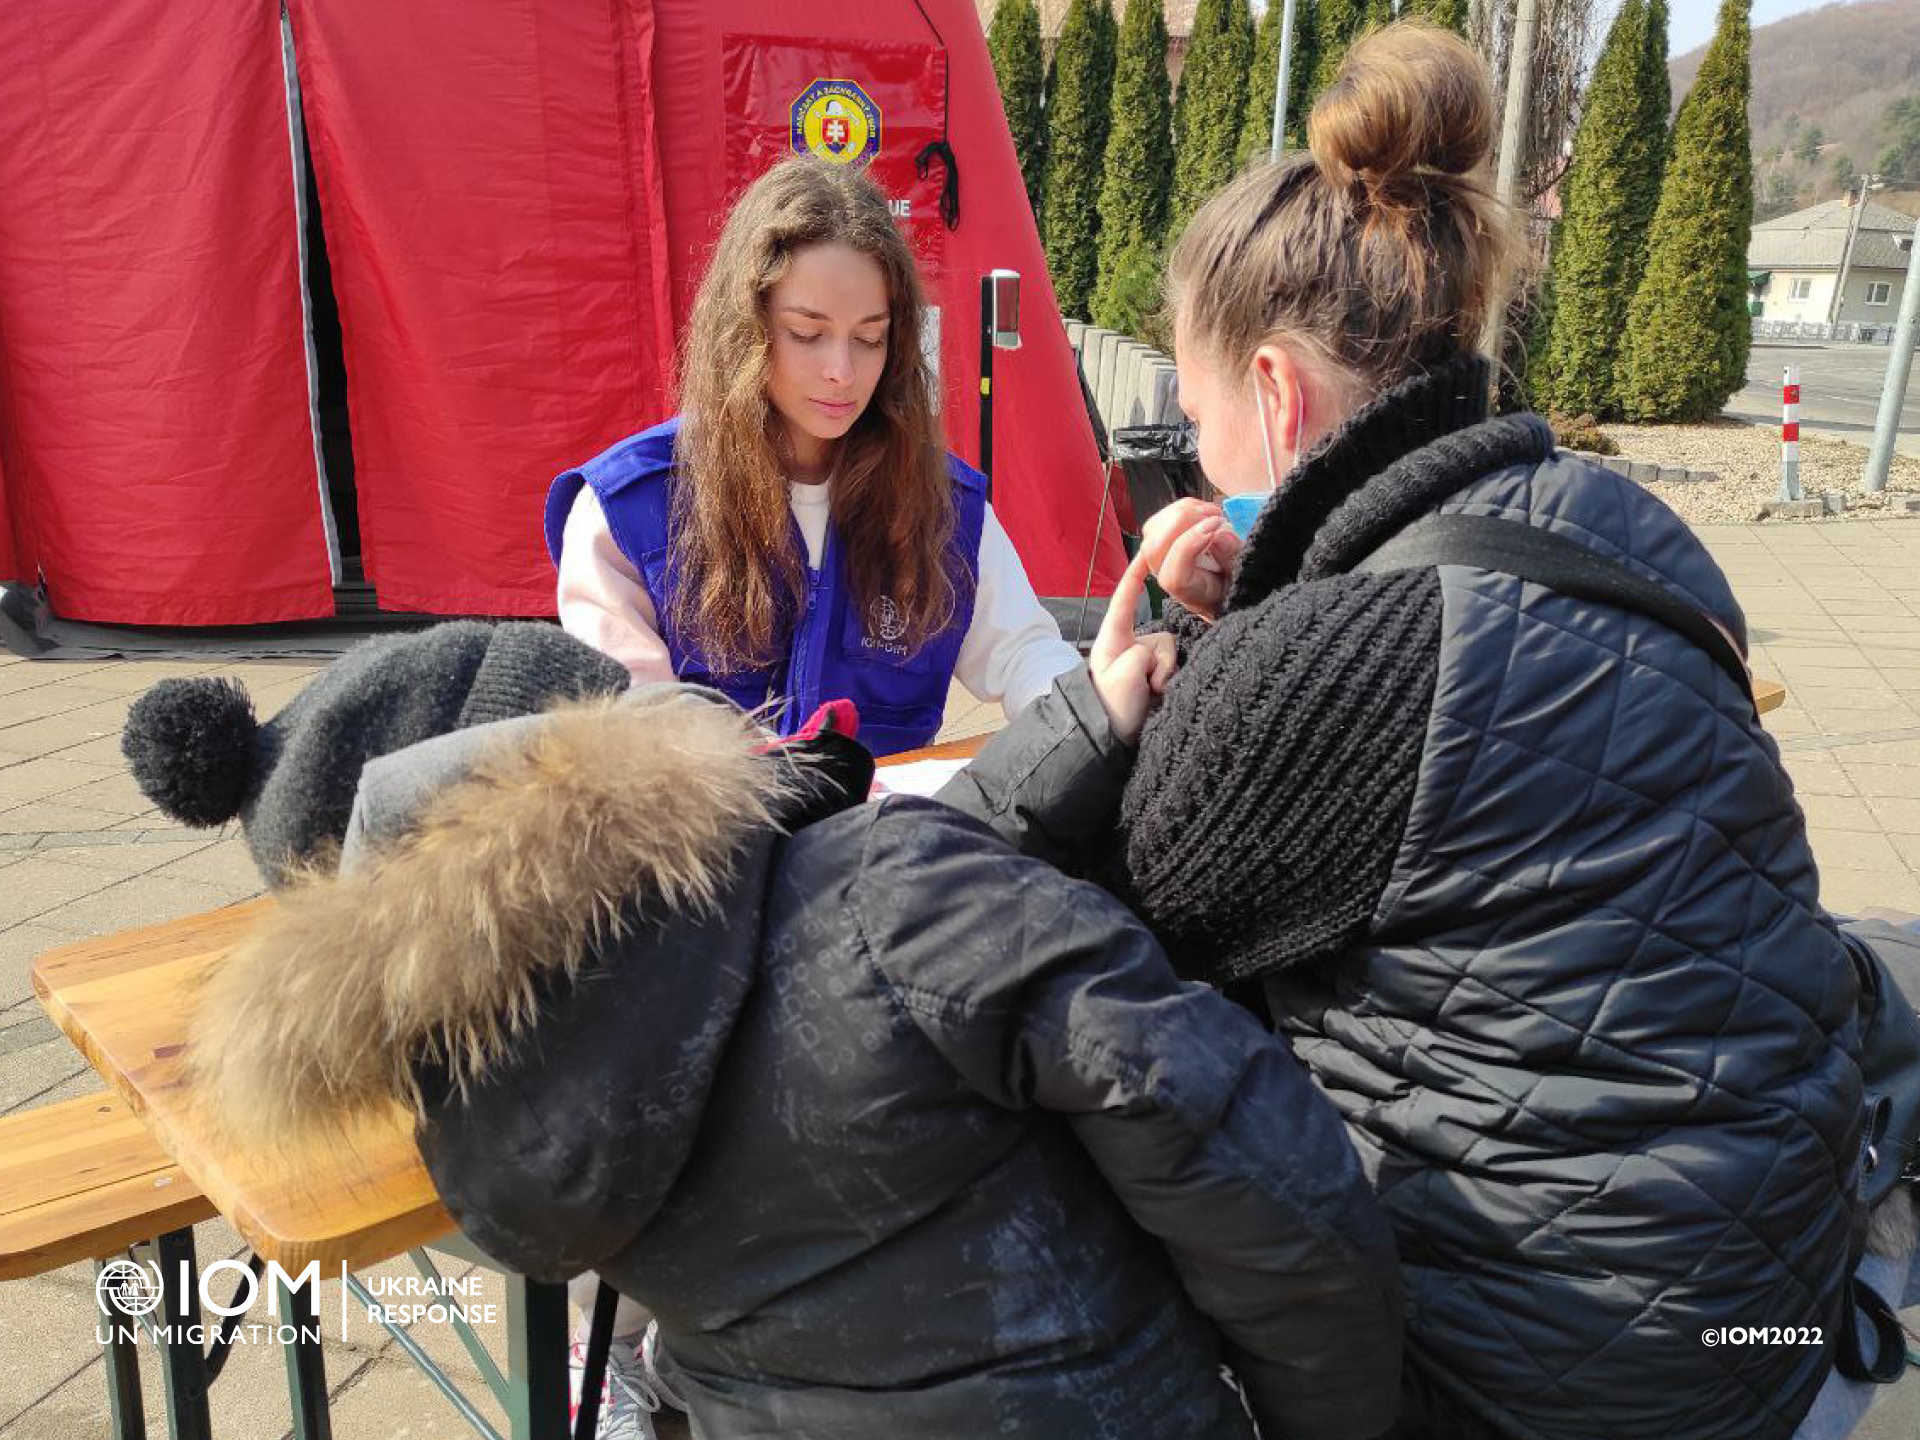 IOM collects data on the mobility, needs and intentions of people fleeing Ukraine. Photo © International Organization for Migration (IOM) 2022.